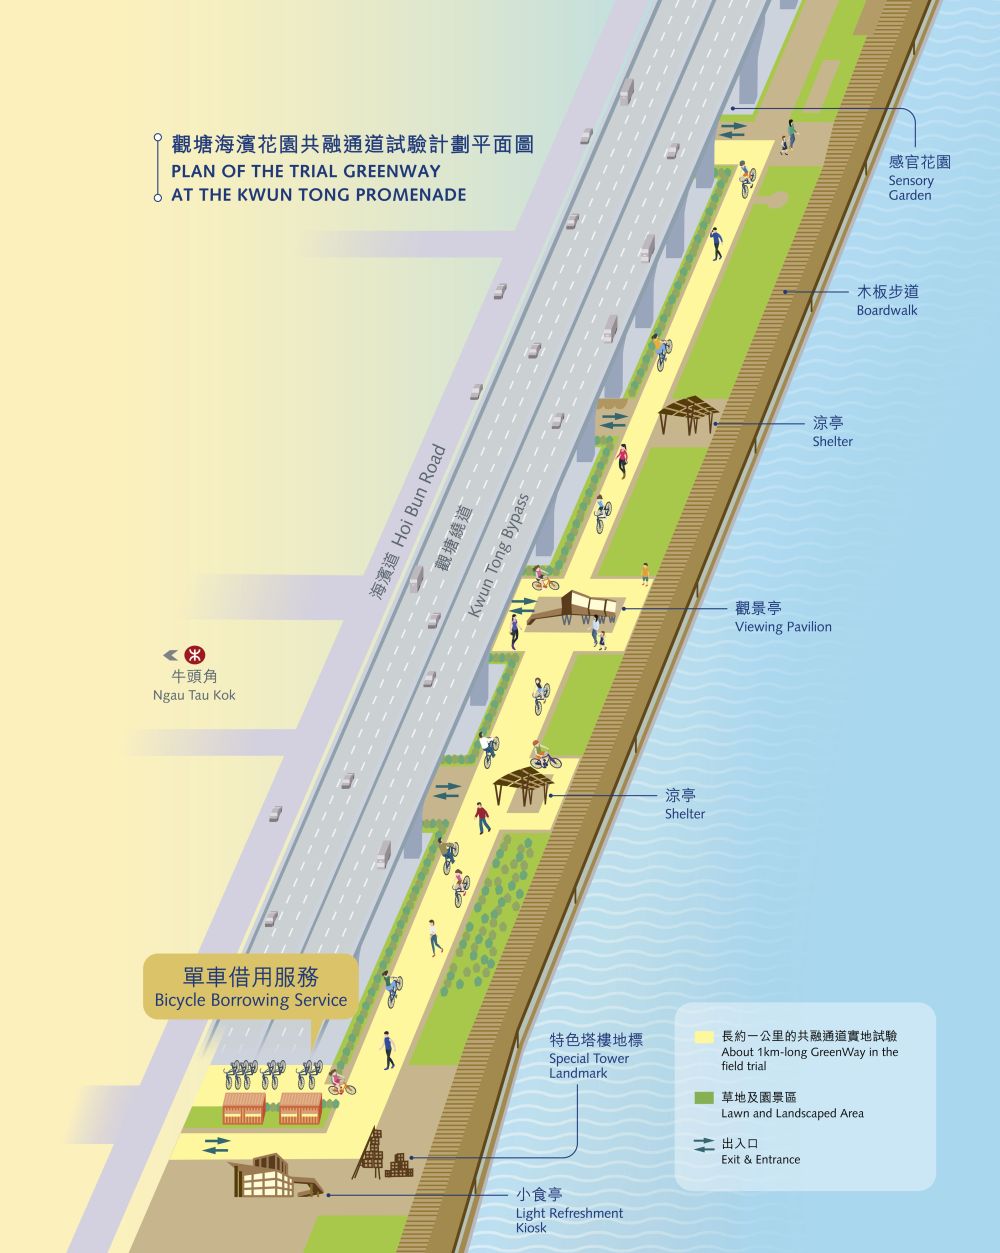 To promote the new concept of shared use of roads between pedestrians and cyclists, the Government has implemented the GreenWay pilot project at the Kwun Tong Promenade since July 2018, which will last for about six months.